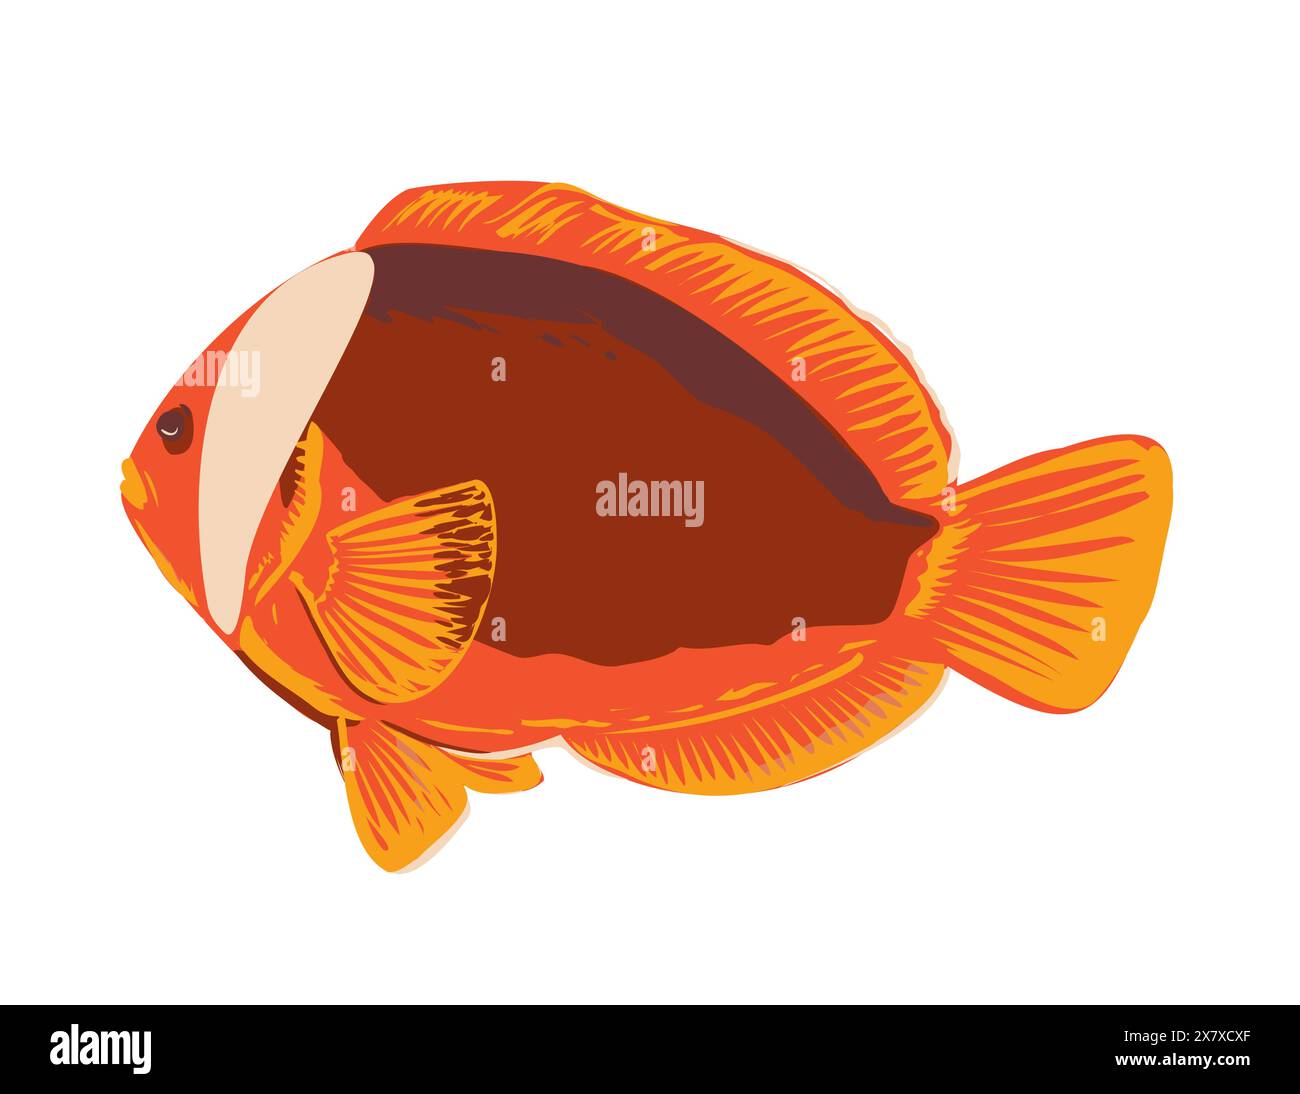 WPA poster art of red anemonefish or Australian clownfish Amphiprion rubrocinctus in the Visayan Sea located in Oslob, Cebu in the Philippines done in Stock Vector